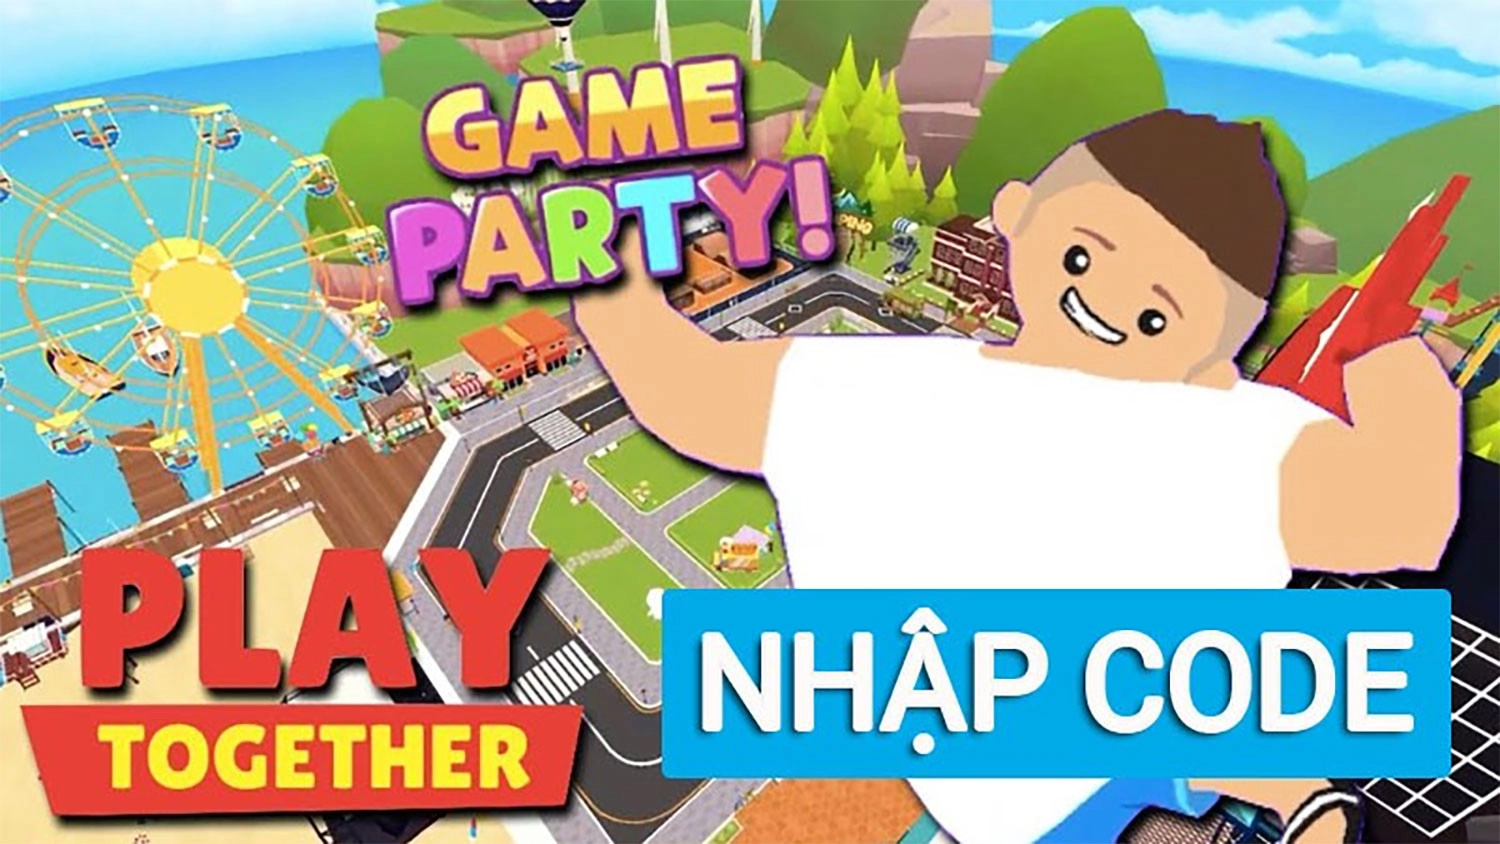 cach-nhap-code-play-together-2